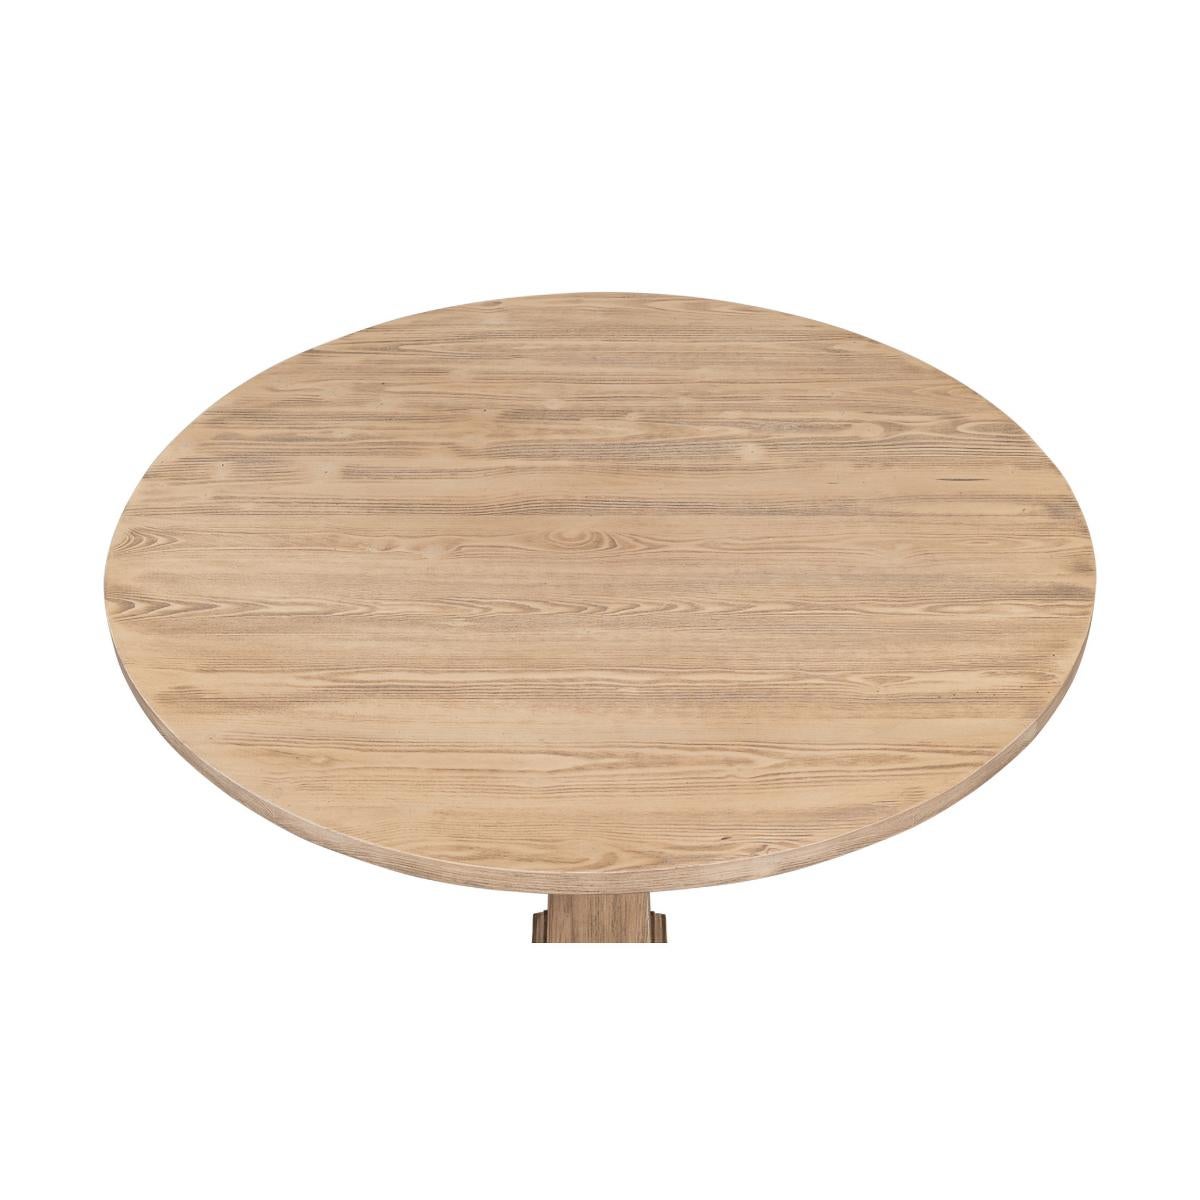 French Modern Bistro Table with a round pine flat top on a tapered column pedestal base.

Dimensions: 36